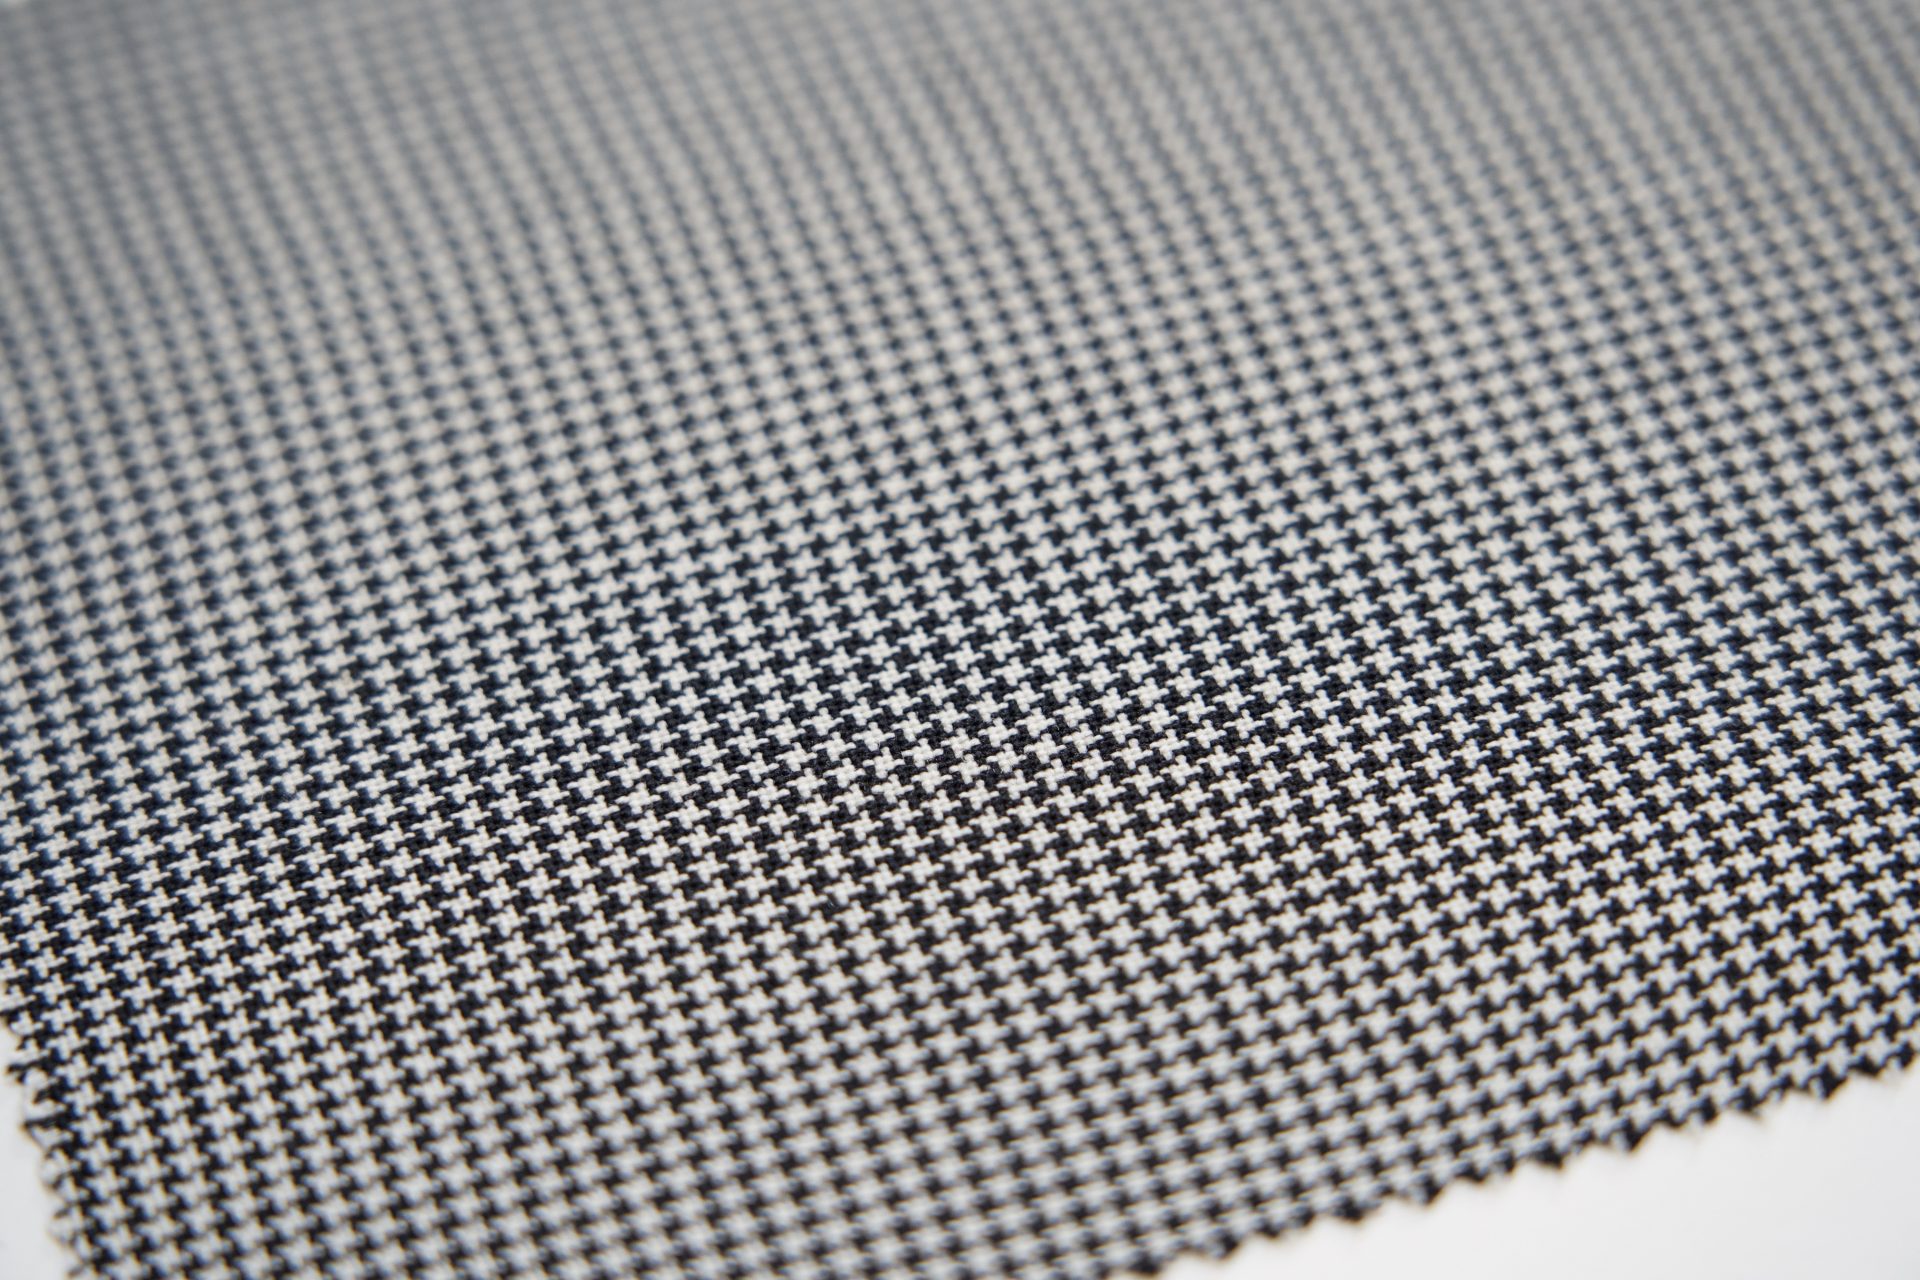 The Different Types of Fabric Weaves